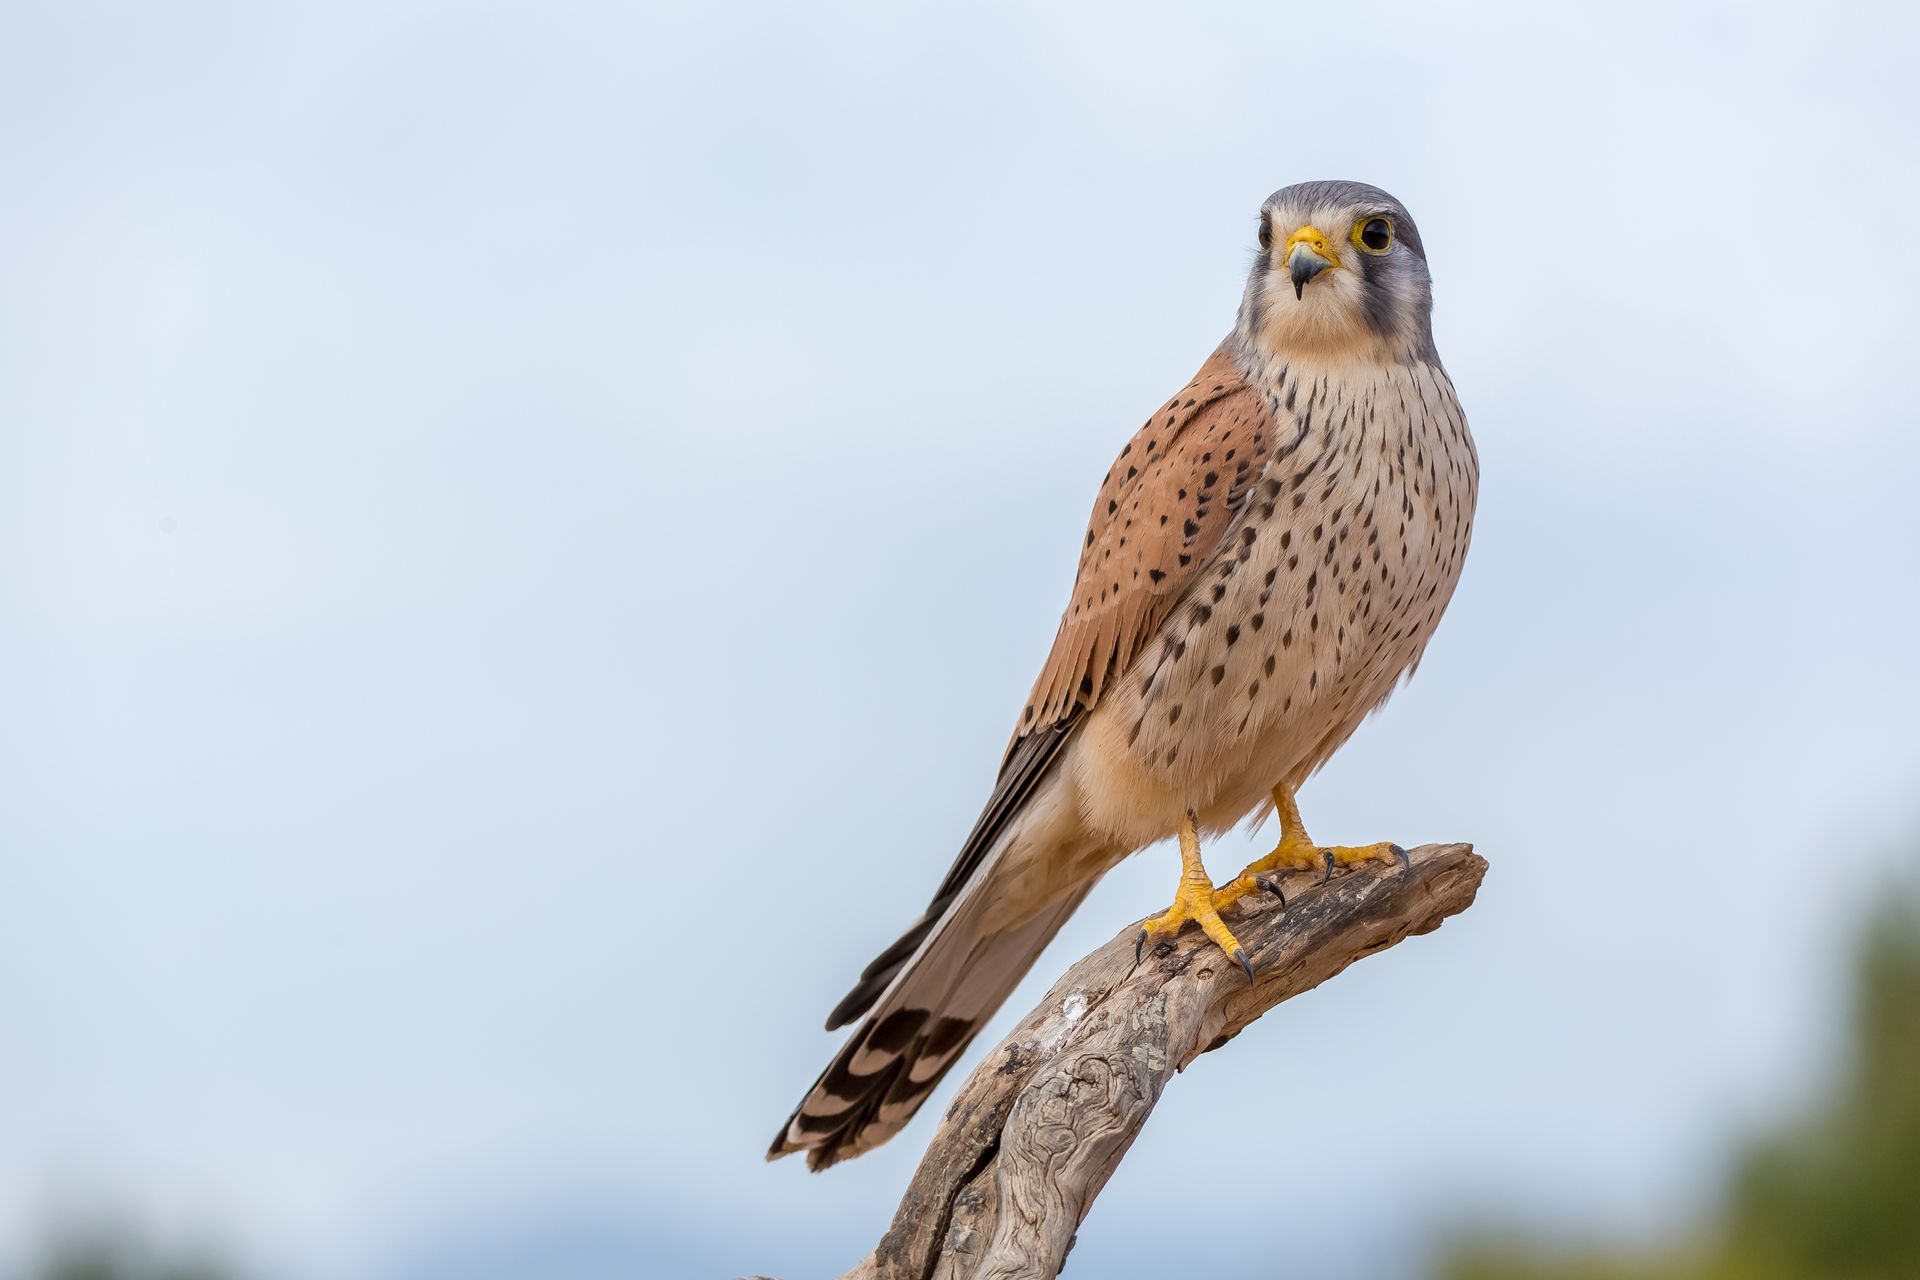 A beautiful Kestrel perched on a branch